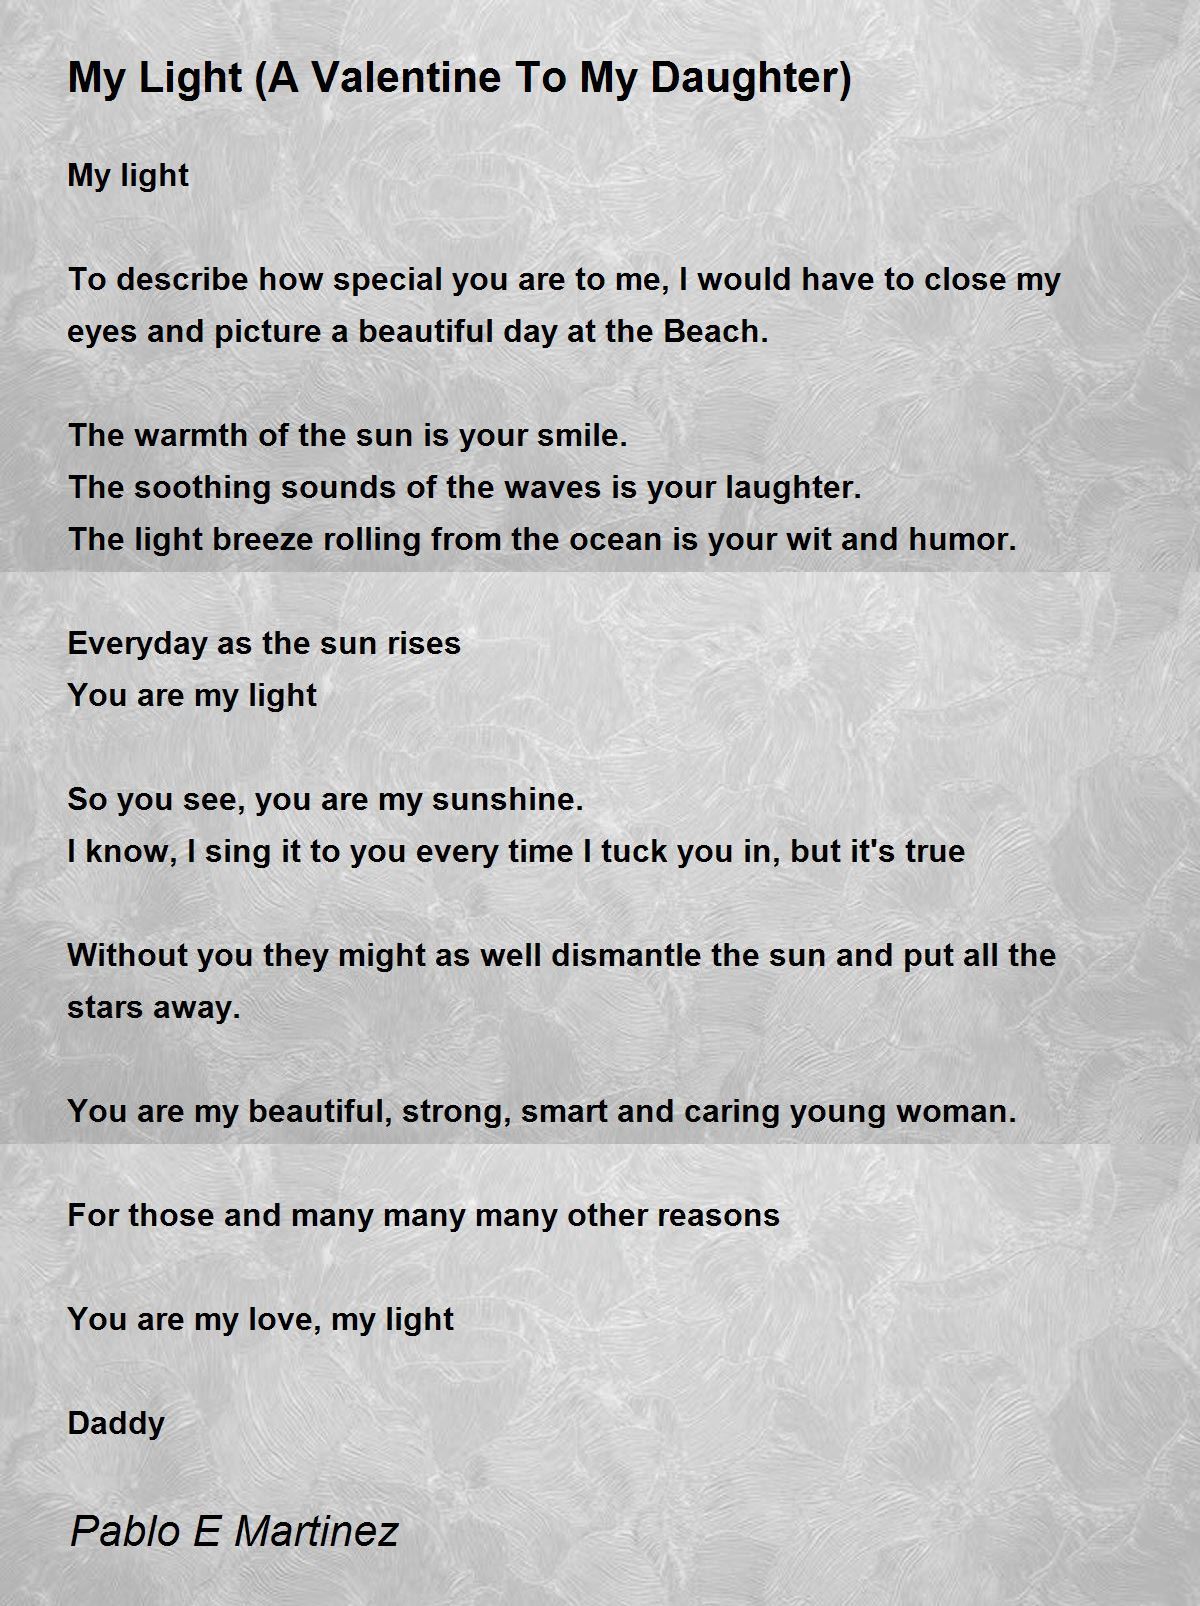 Daughter poem for valentines day Just For